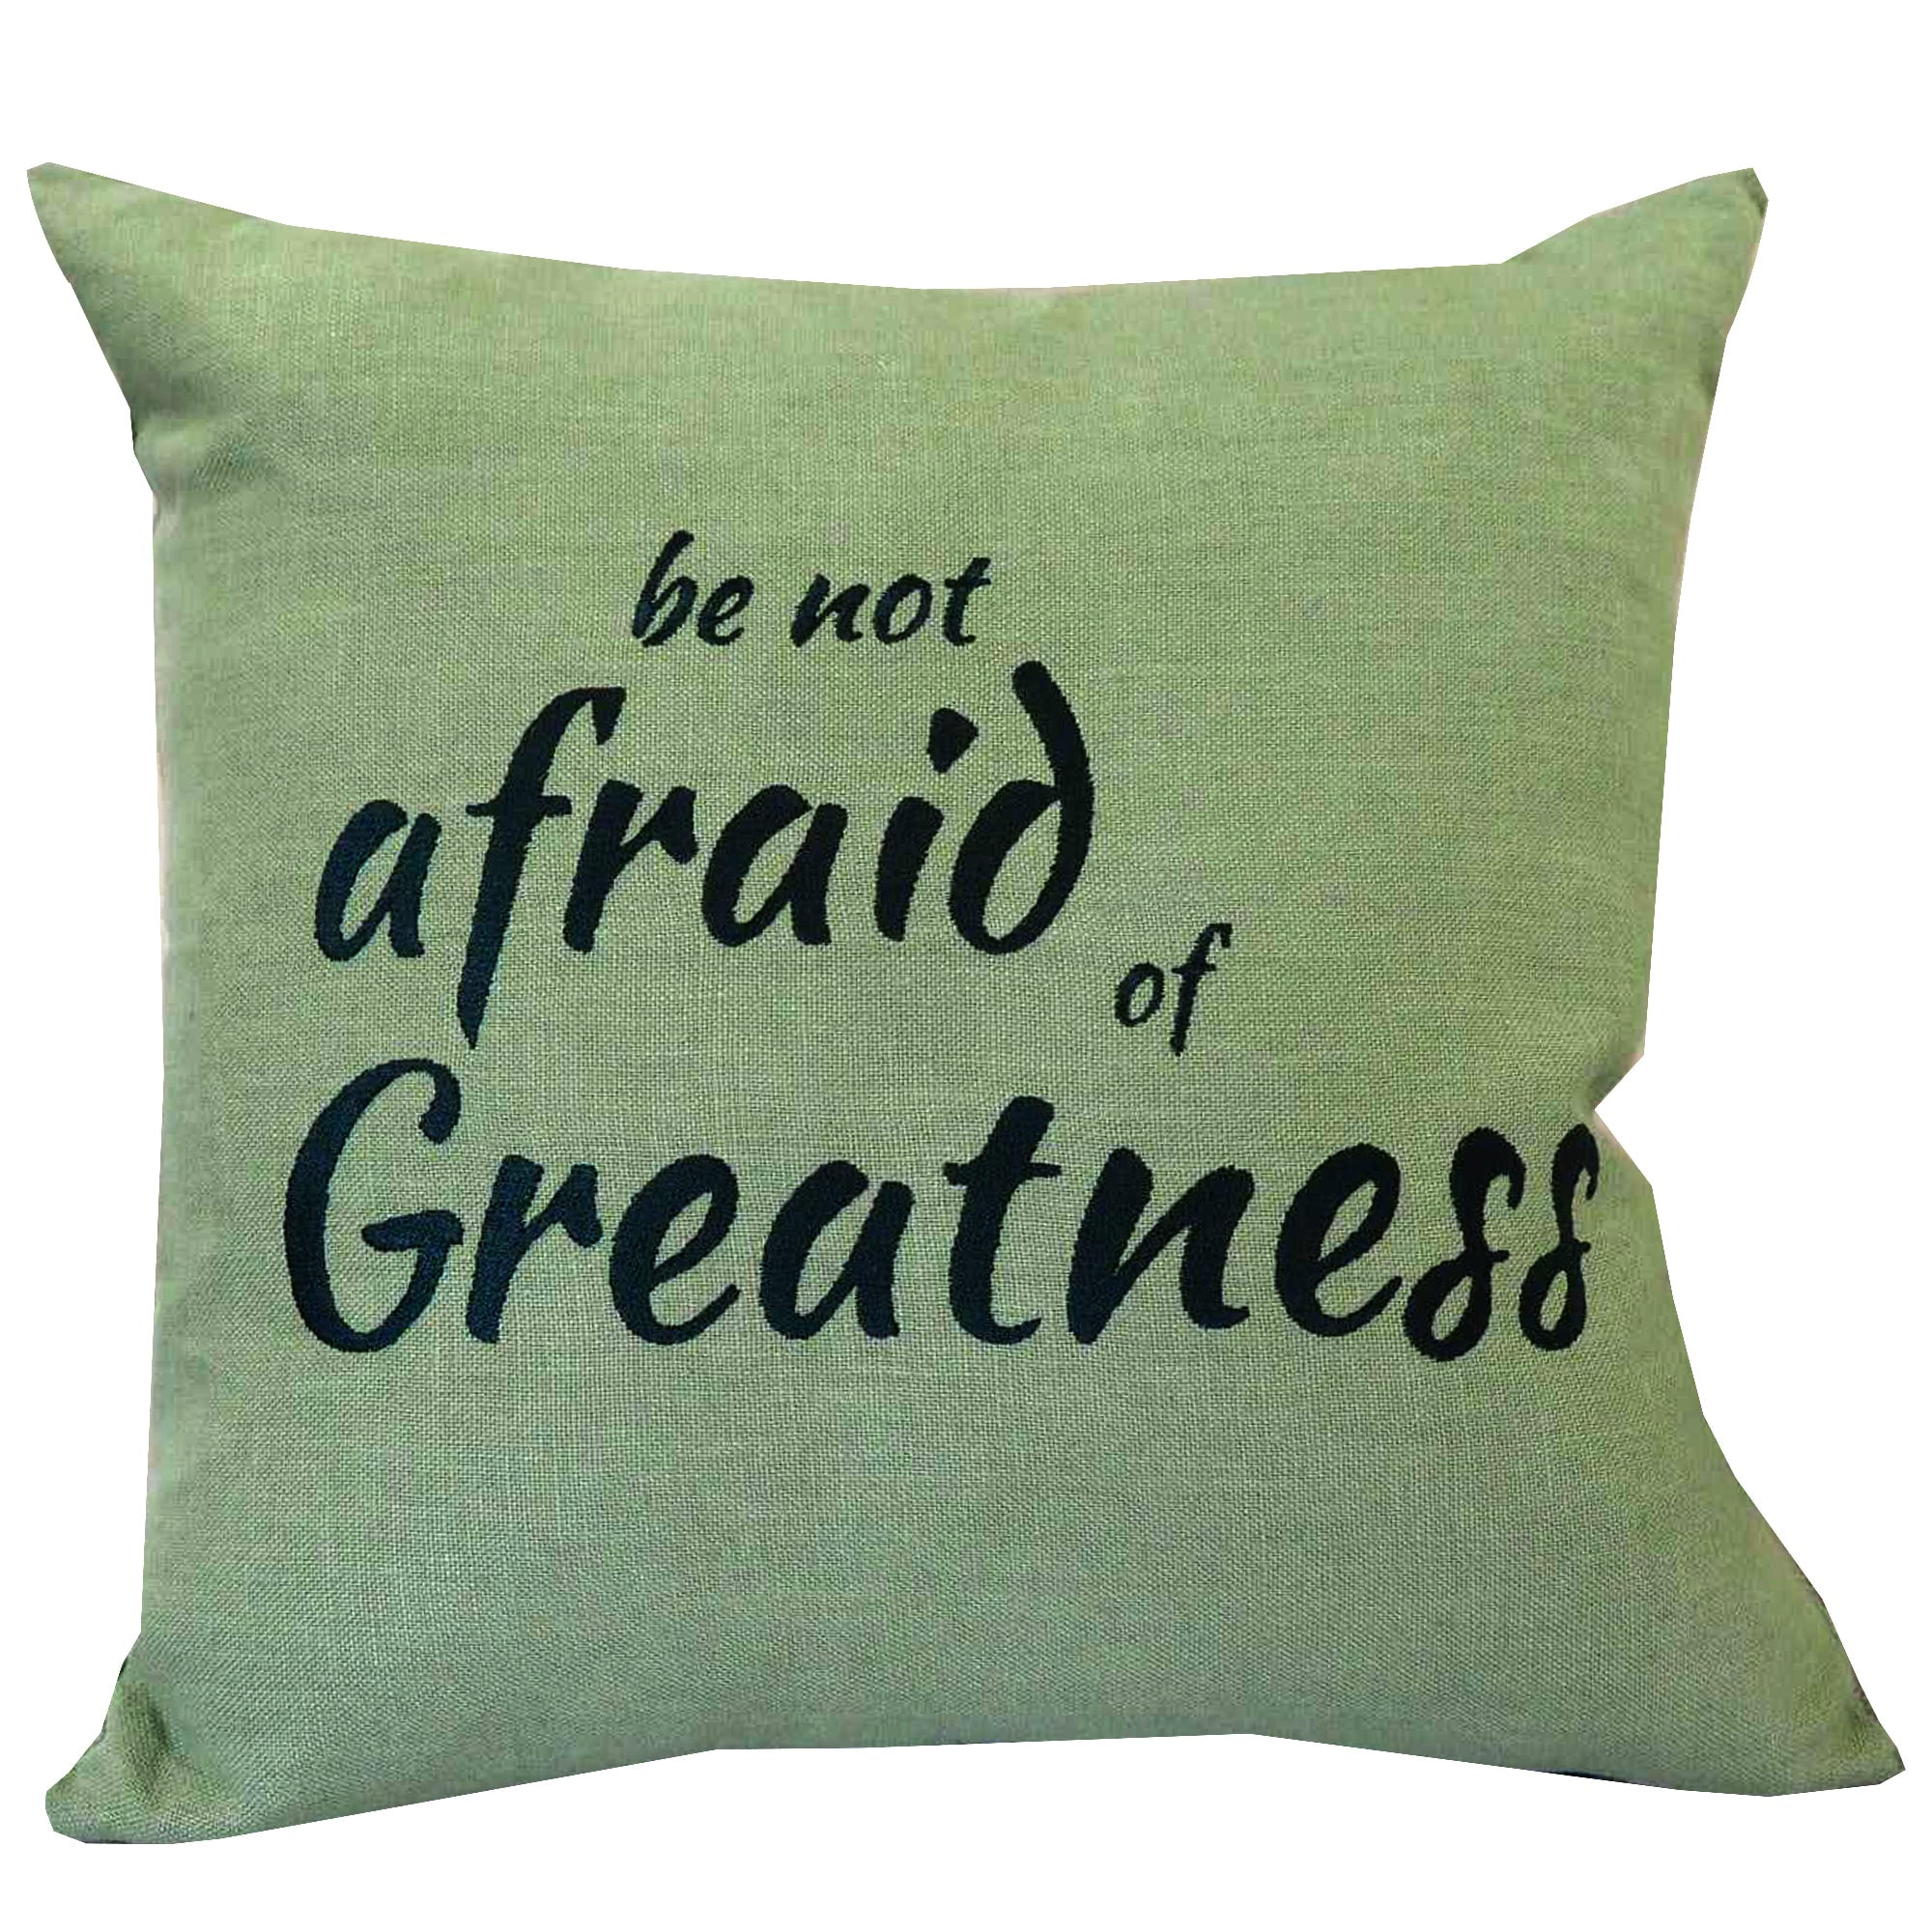 Shakespeare Quote 'Be not afraid of greatness' Cushion